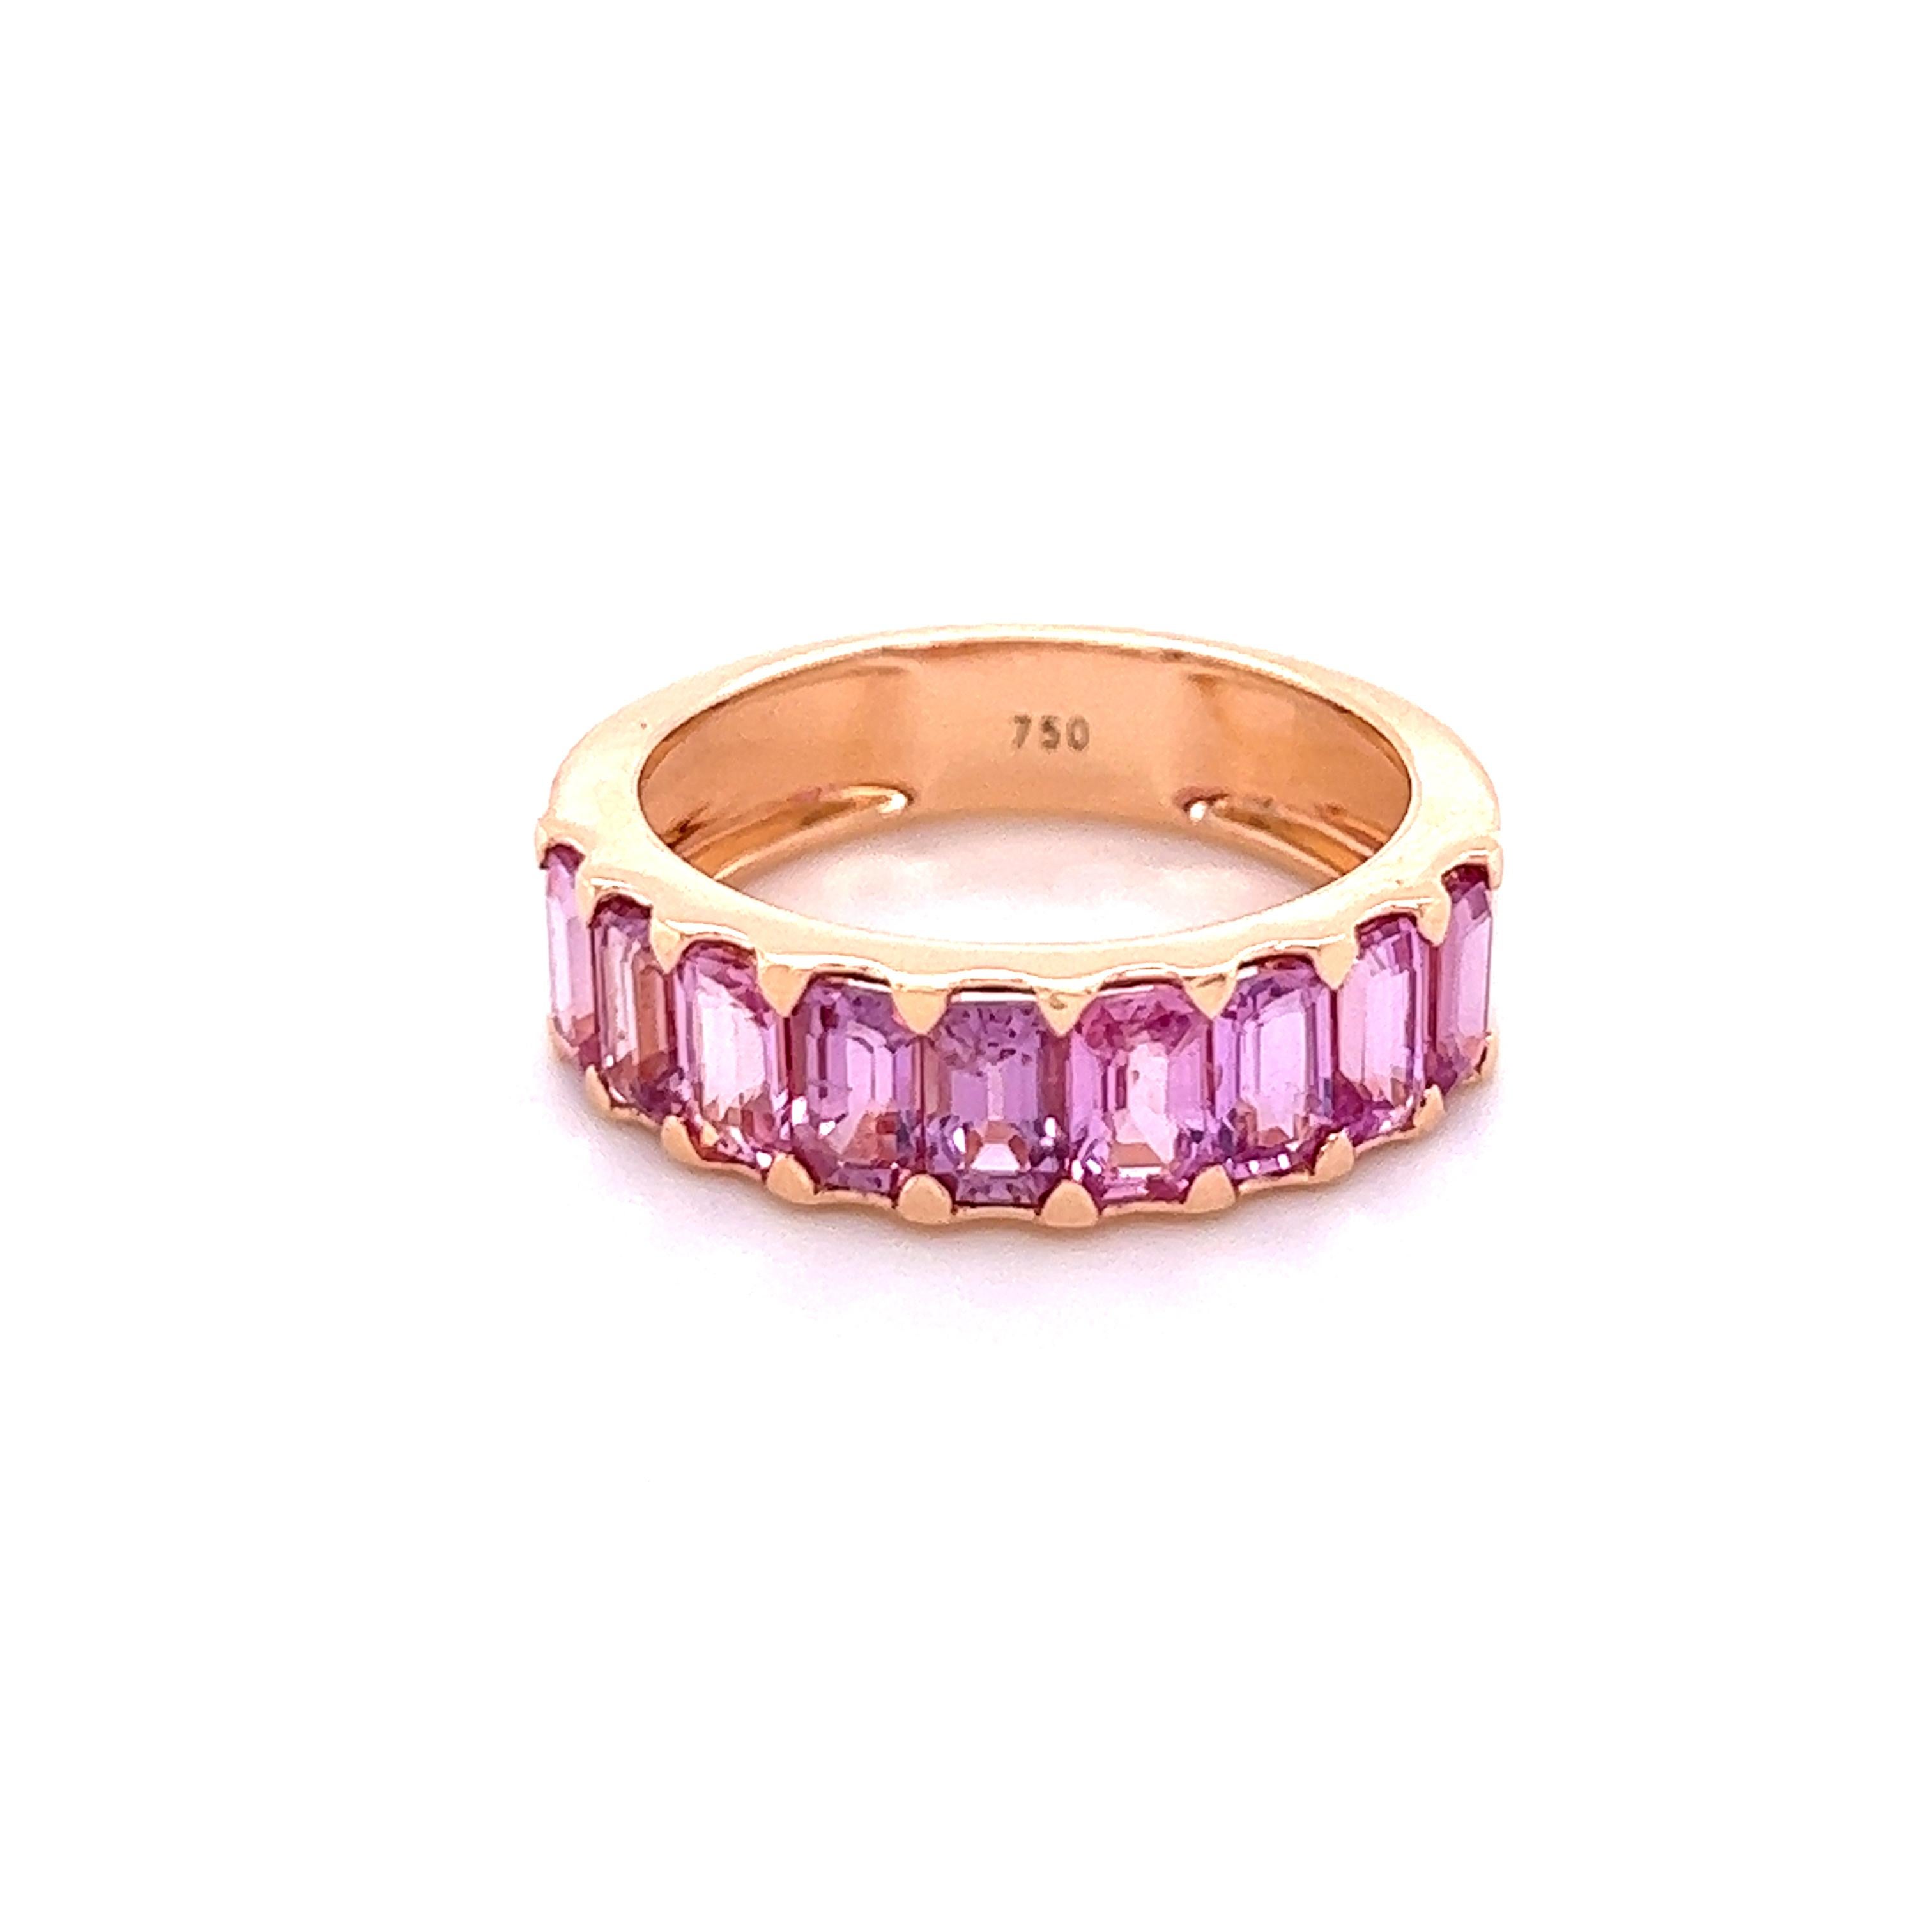 Beautiful Pink Sapphire Eternity Band Ring. The ring has very clean pink rare sapphires. Ideal worn alone or as an alternative Engagement/Wedding ring is new on. More Beautiful in real time! 

9 Pink Sapphire -  3.11 CT
18 K Rose Gold -  4.42